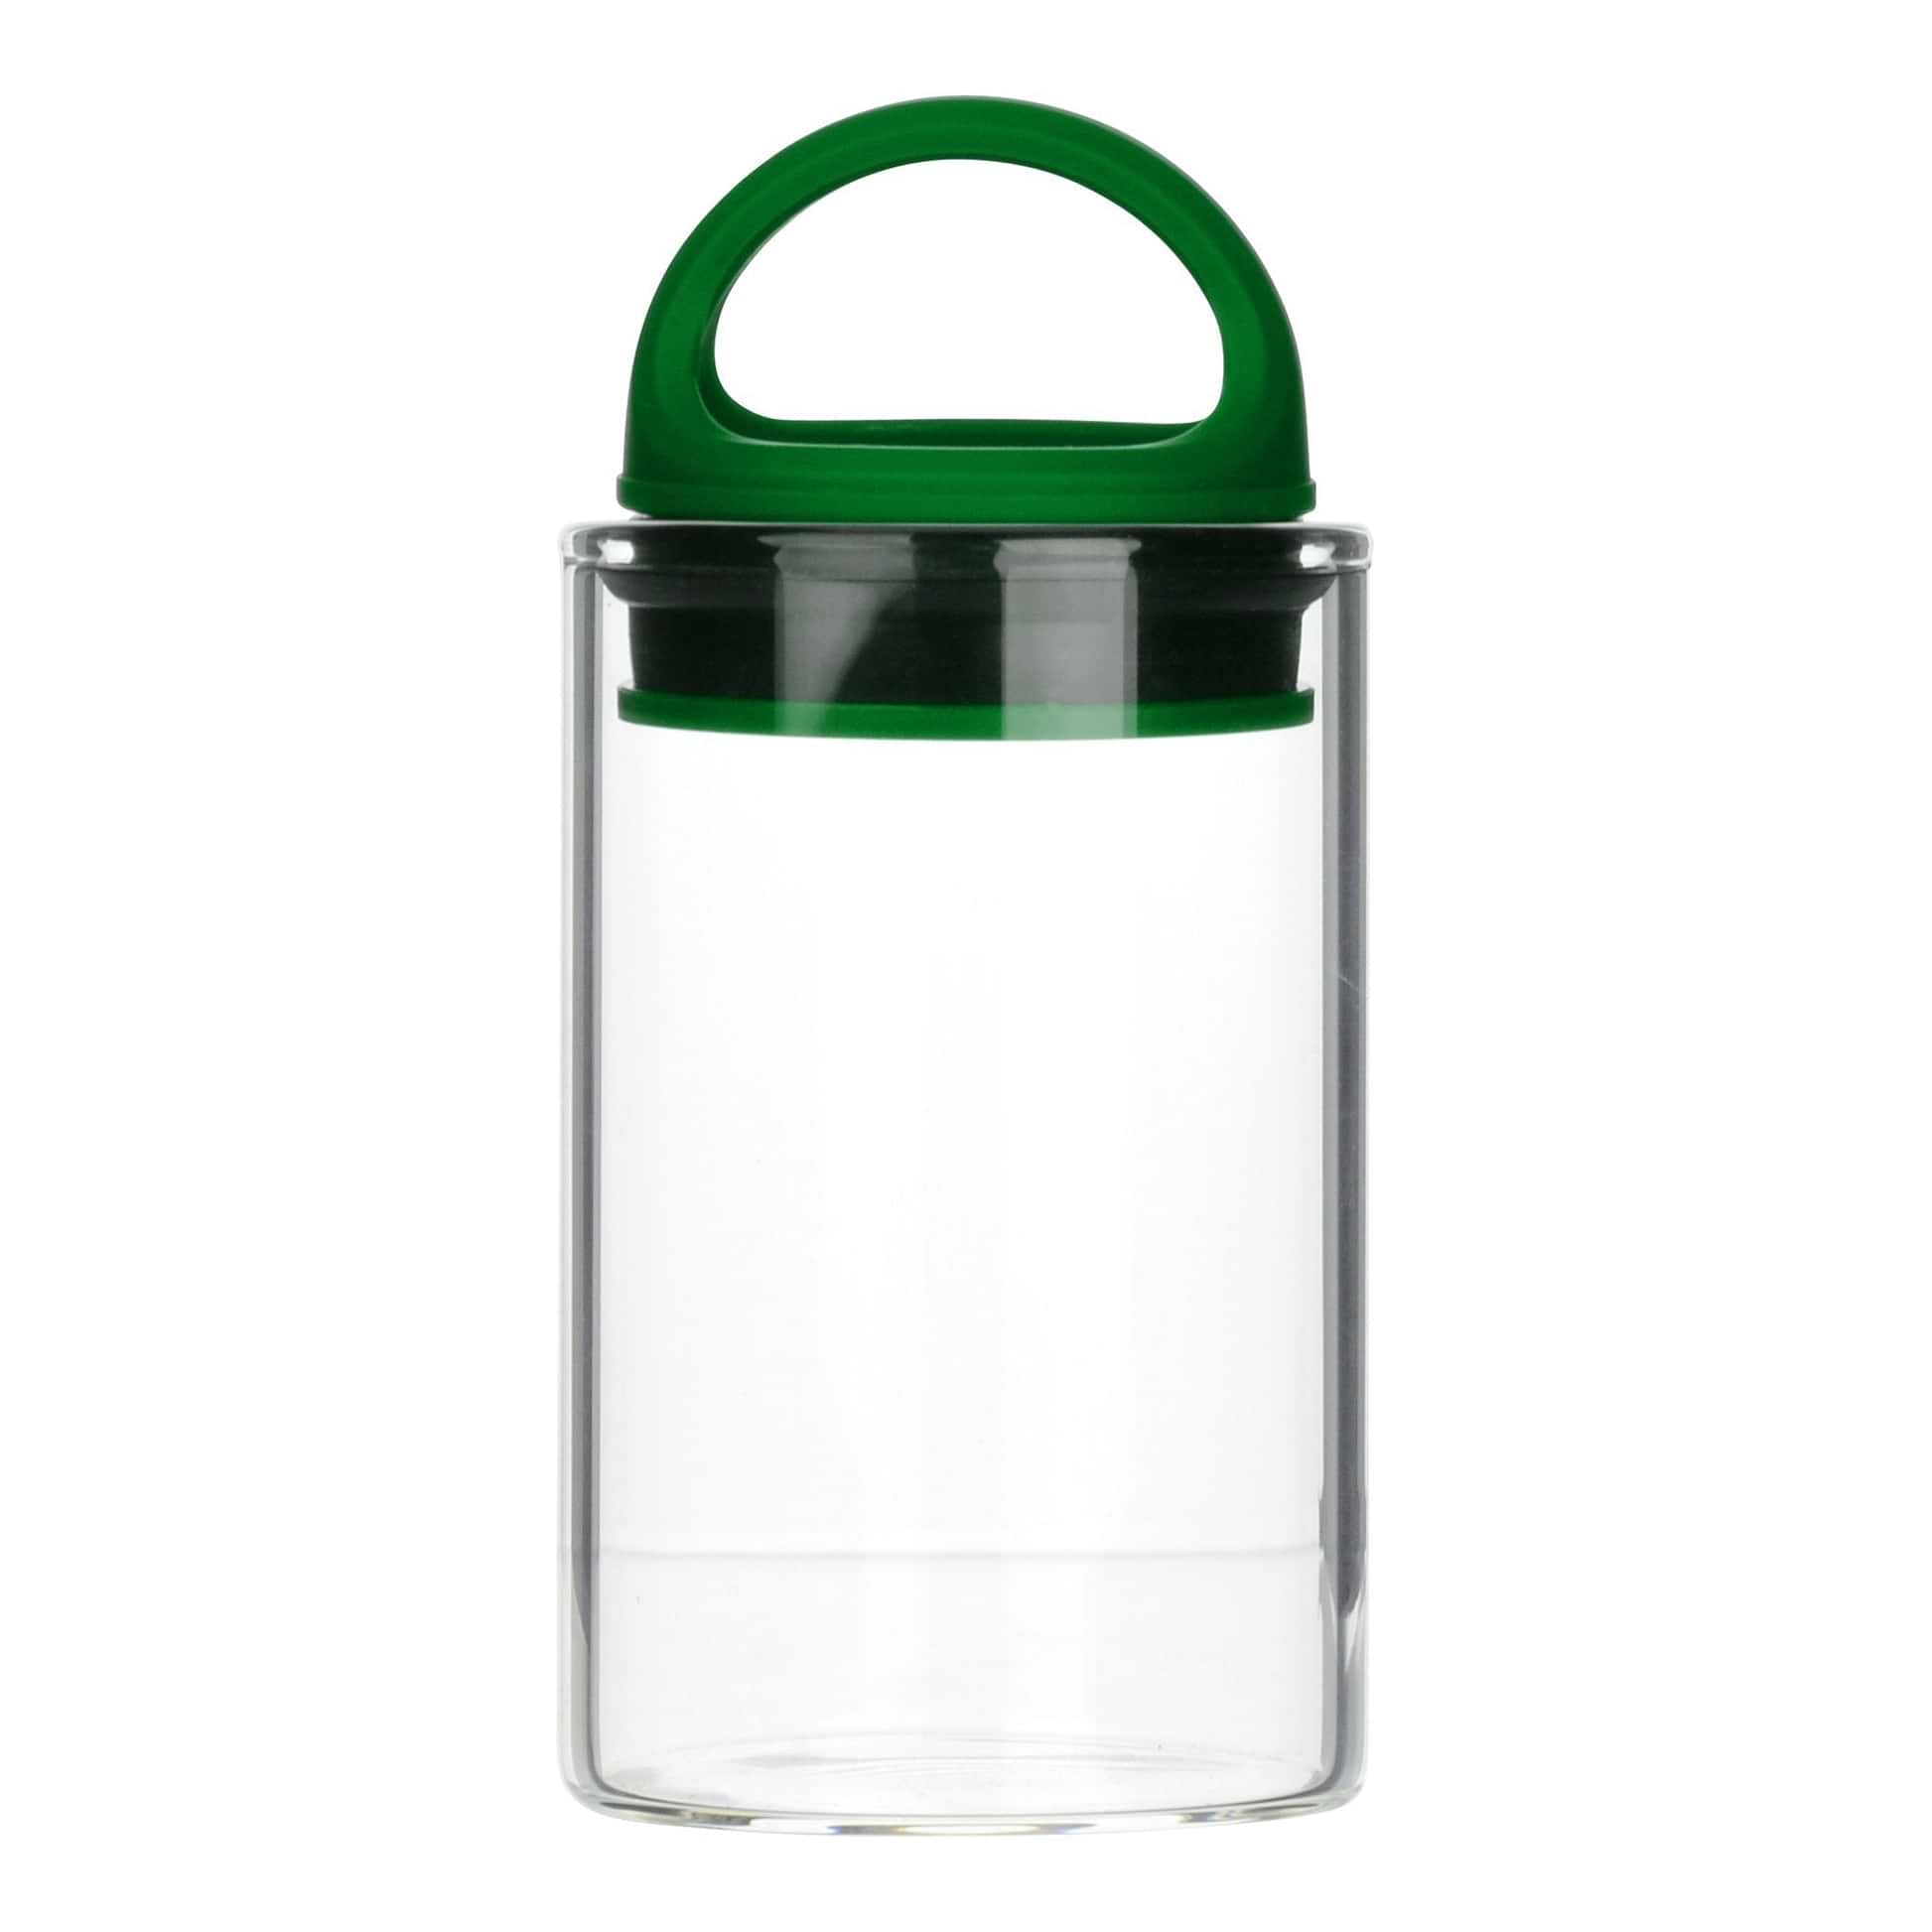 Green clear glass stash jar storage container vacuum seal easy-to-carry with curved handle